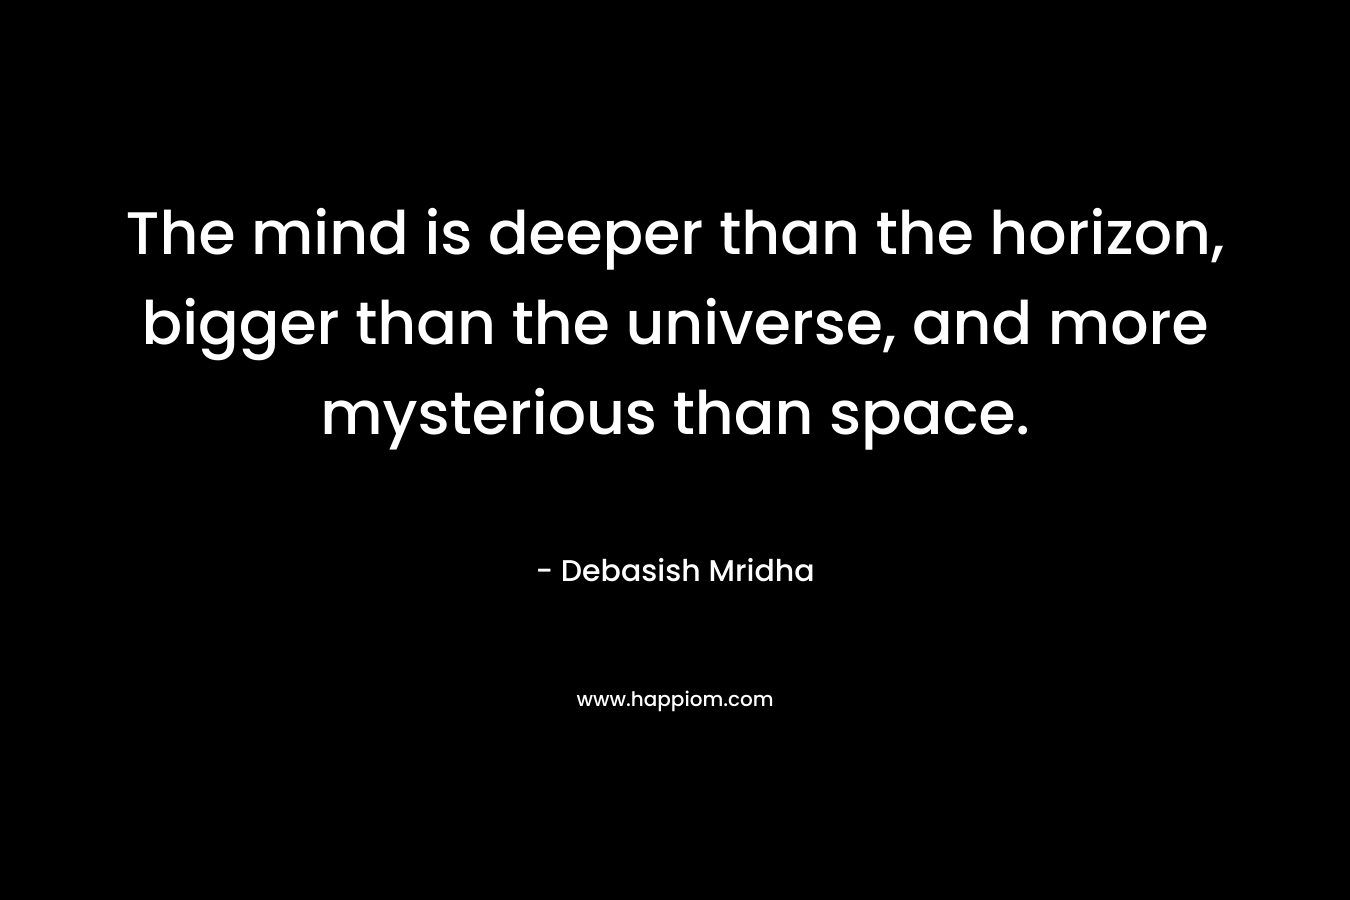 The mind is deeper than the horizon, bigger than the universe, and more mysterious than space.